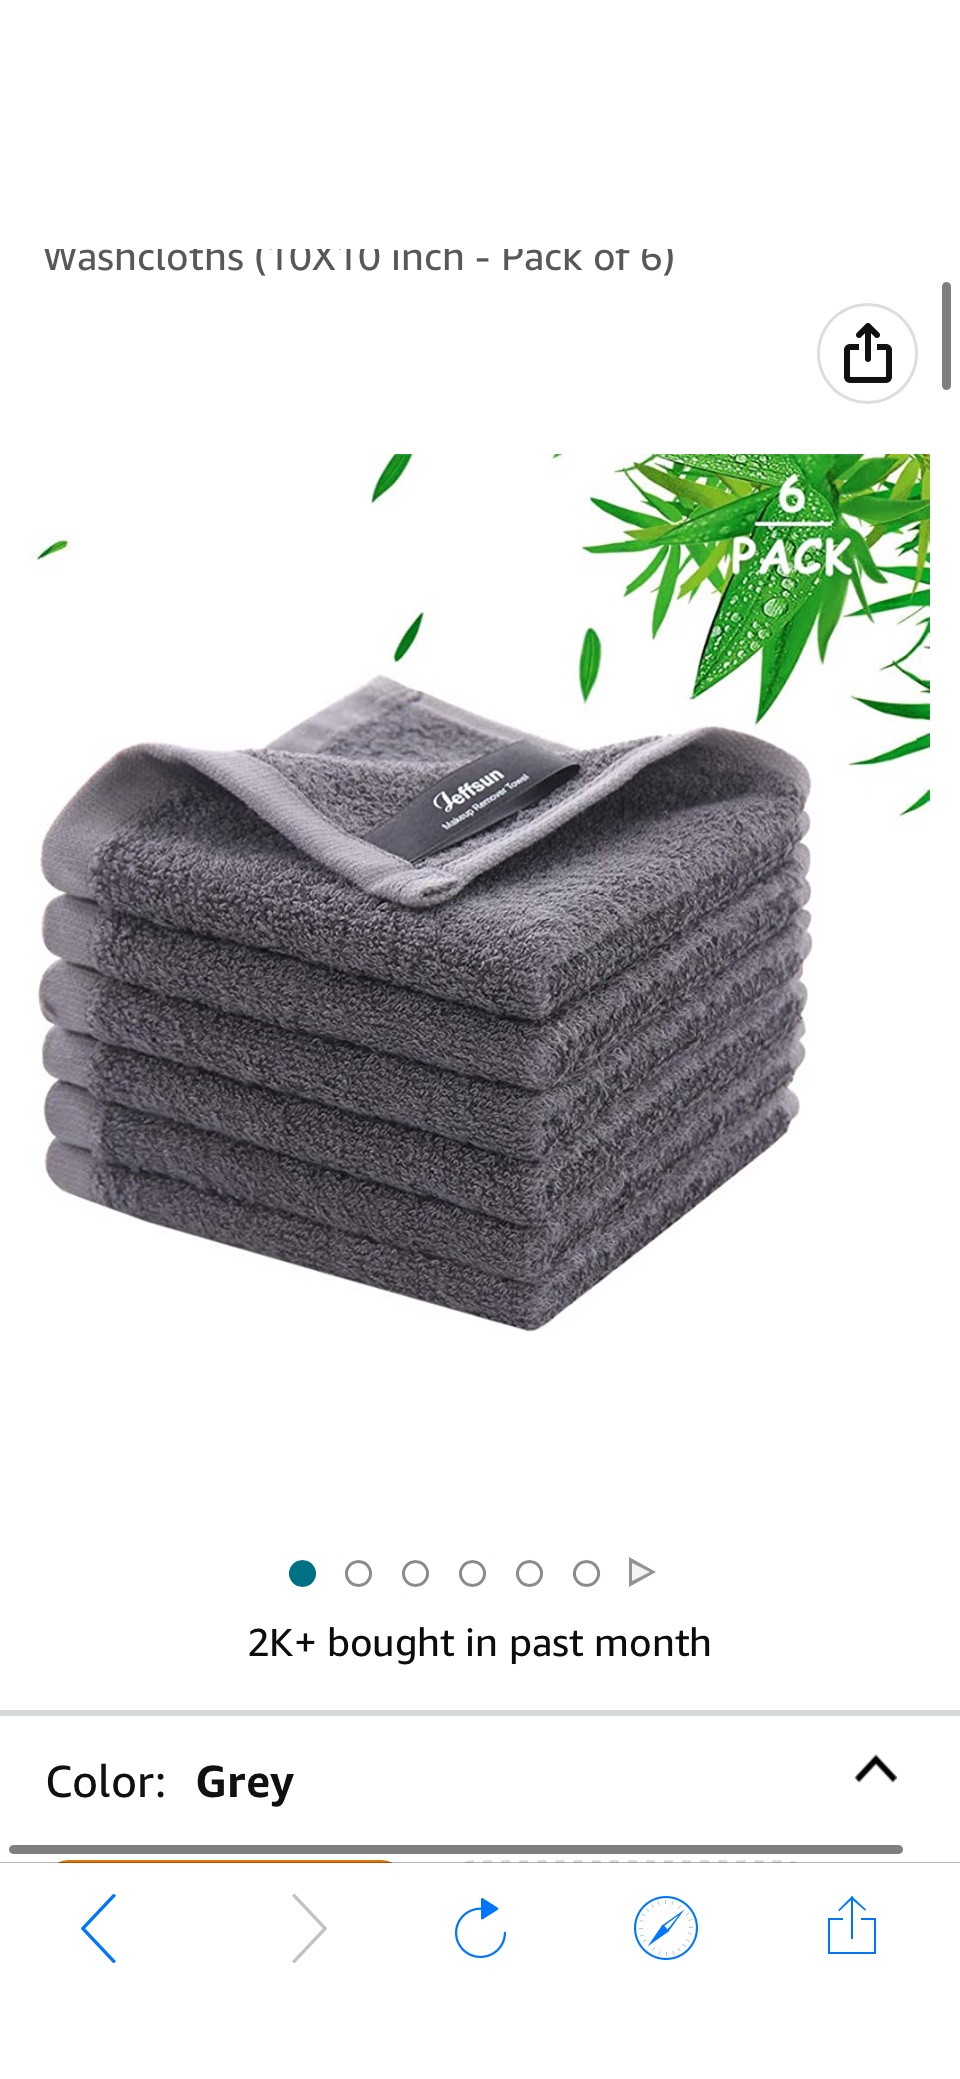 Amazon.com: JEFFSUN Bamboo Wash Cloths, Super Soft and Gentle Face Towel for Delicate Sensitive Skin, Baby Washcloths, Reusable Makeup Remover Face Cleansing Cloths (10 X 10 inch - Pack of 12, Grey) : Beauty & Personal Care原价19.99